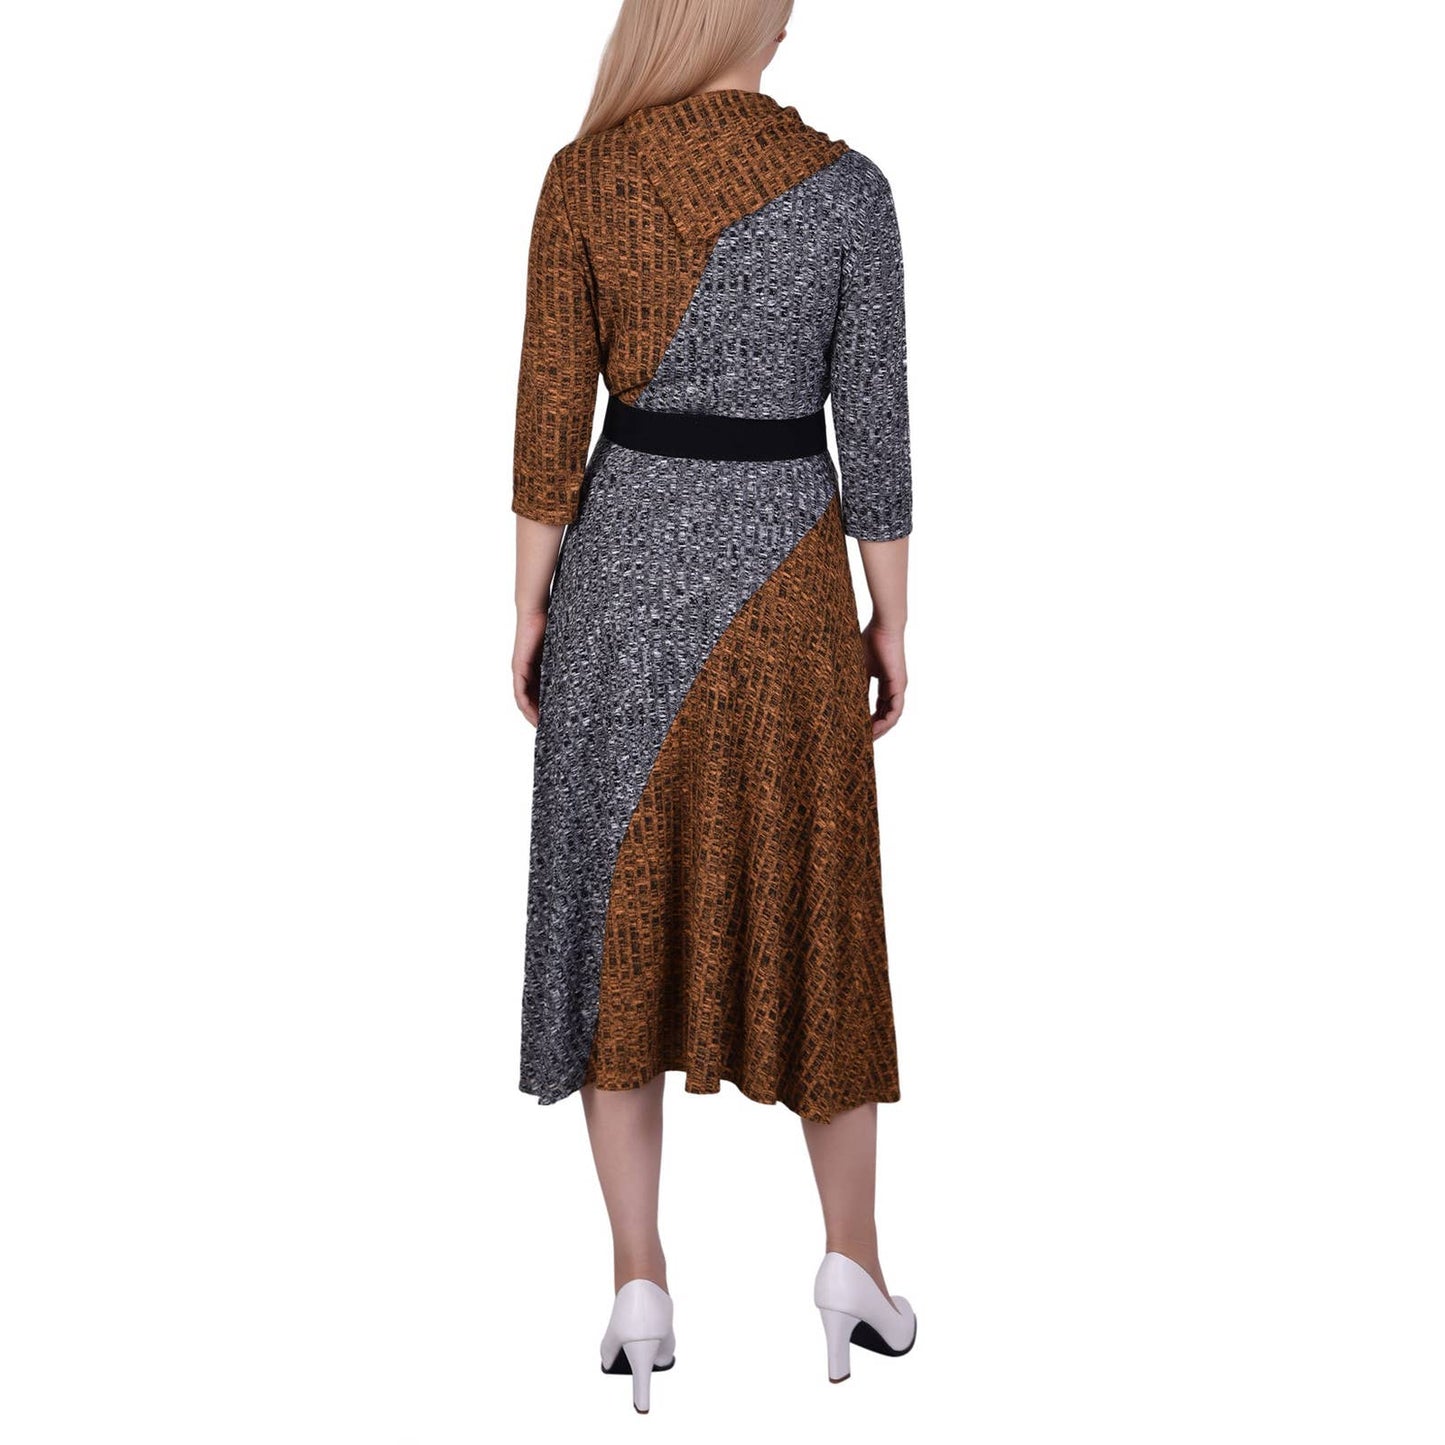 NY COLLECTION Women's Rust/Grey 3/4 Sleeve Belted Colorblocked Cowl-Mask Dress